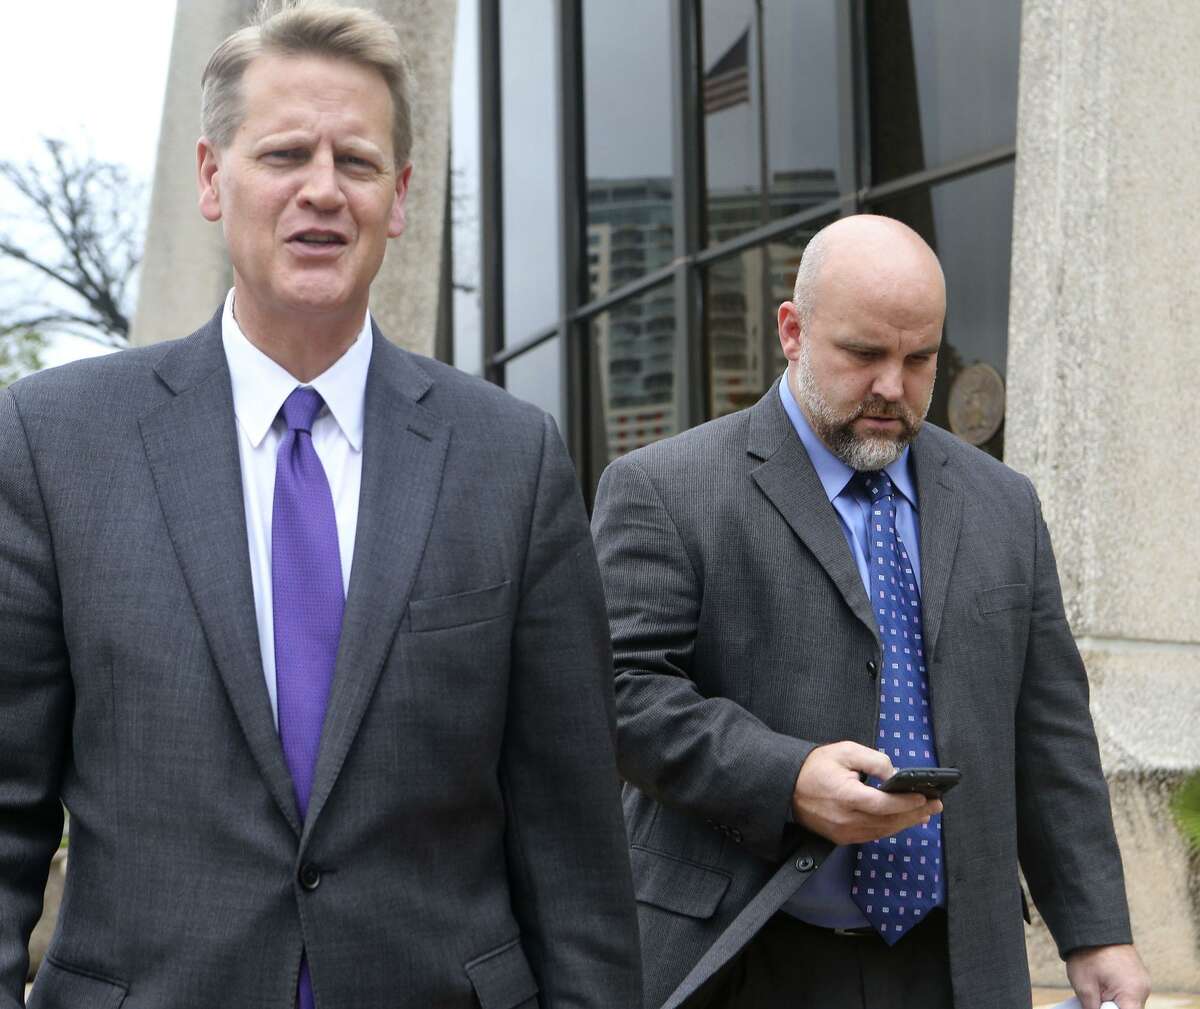 Shannon Smith (right), FourWinds Logistics’ former chief operating officer and 48-percent owner, was called by the prosecution to testify today in the criminal fraud trial of state Sen. Carlos Uresti. Smith pleaded guilty to one count of conspiracy to commit wire fraud in 2016 and has been cooperating with prosecutors. Smith is pictured here leaving the San Antonio federal courthouse in 2016 with his attorney Alex Scharff.